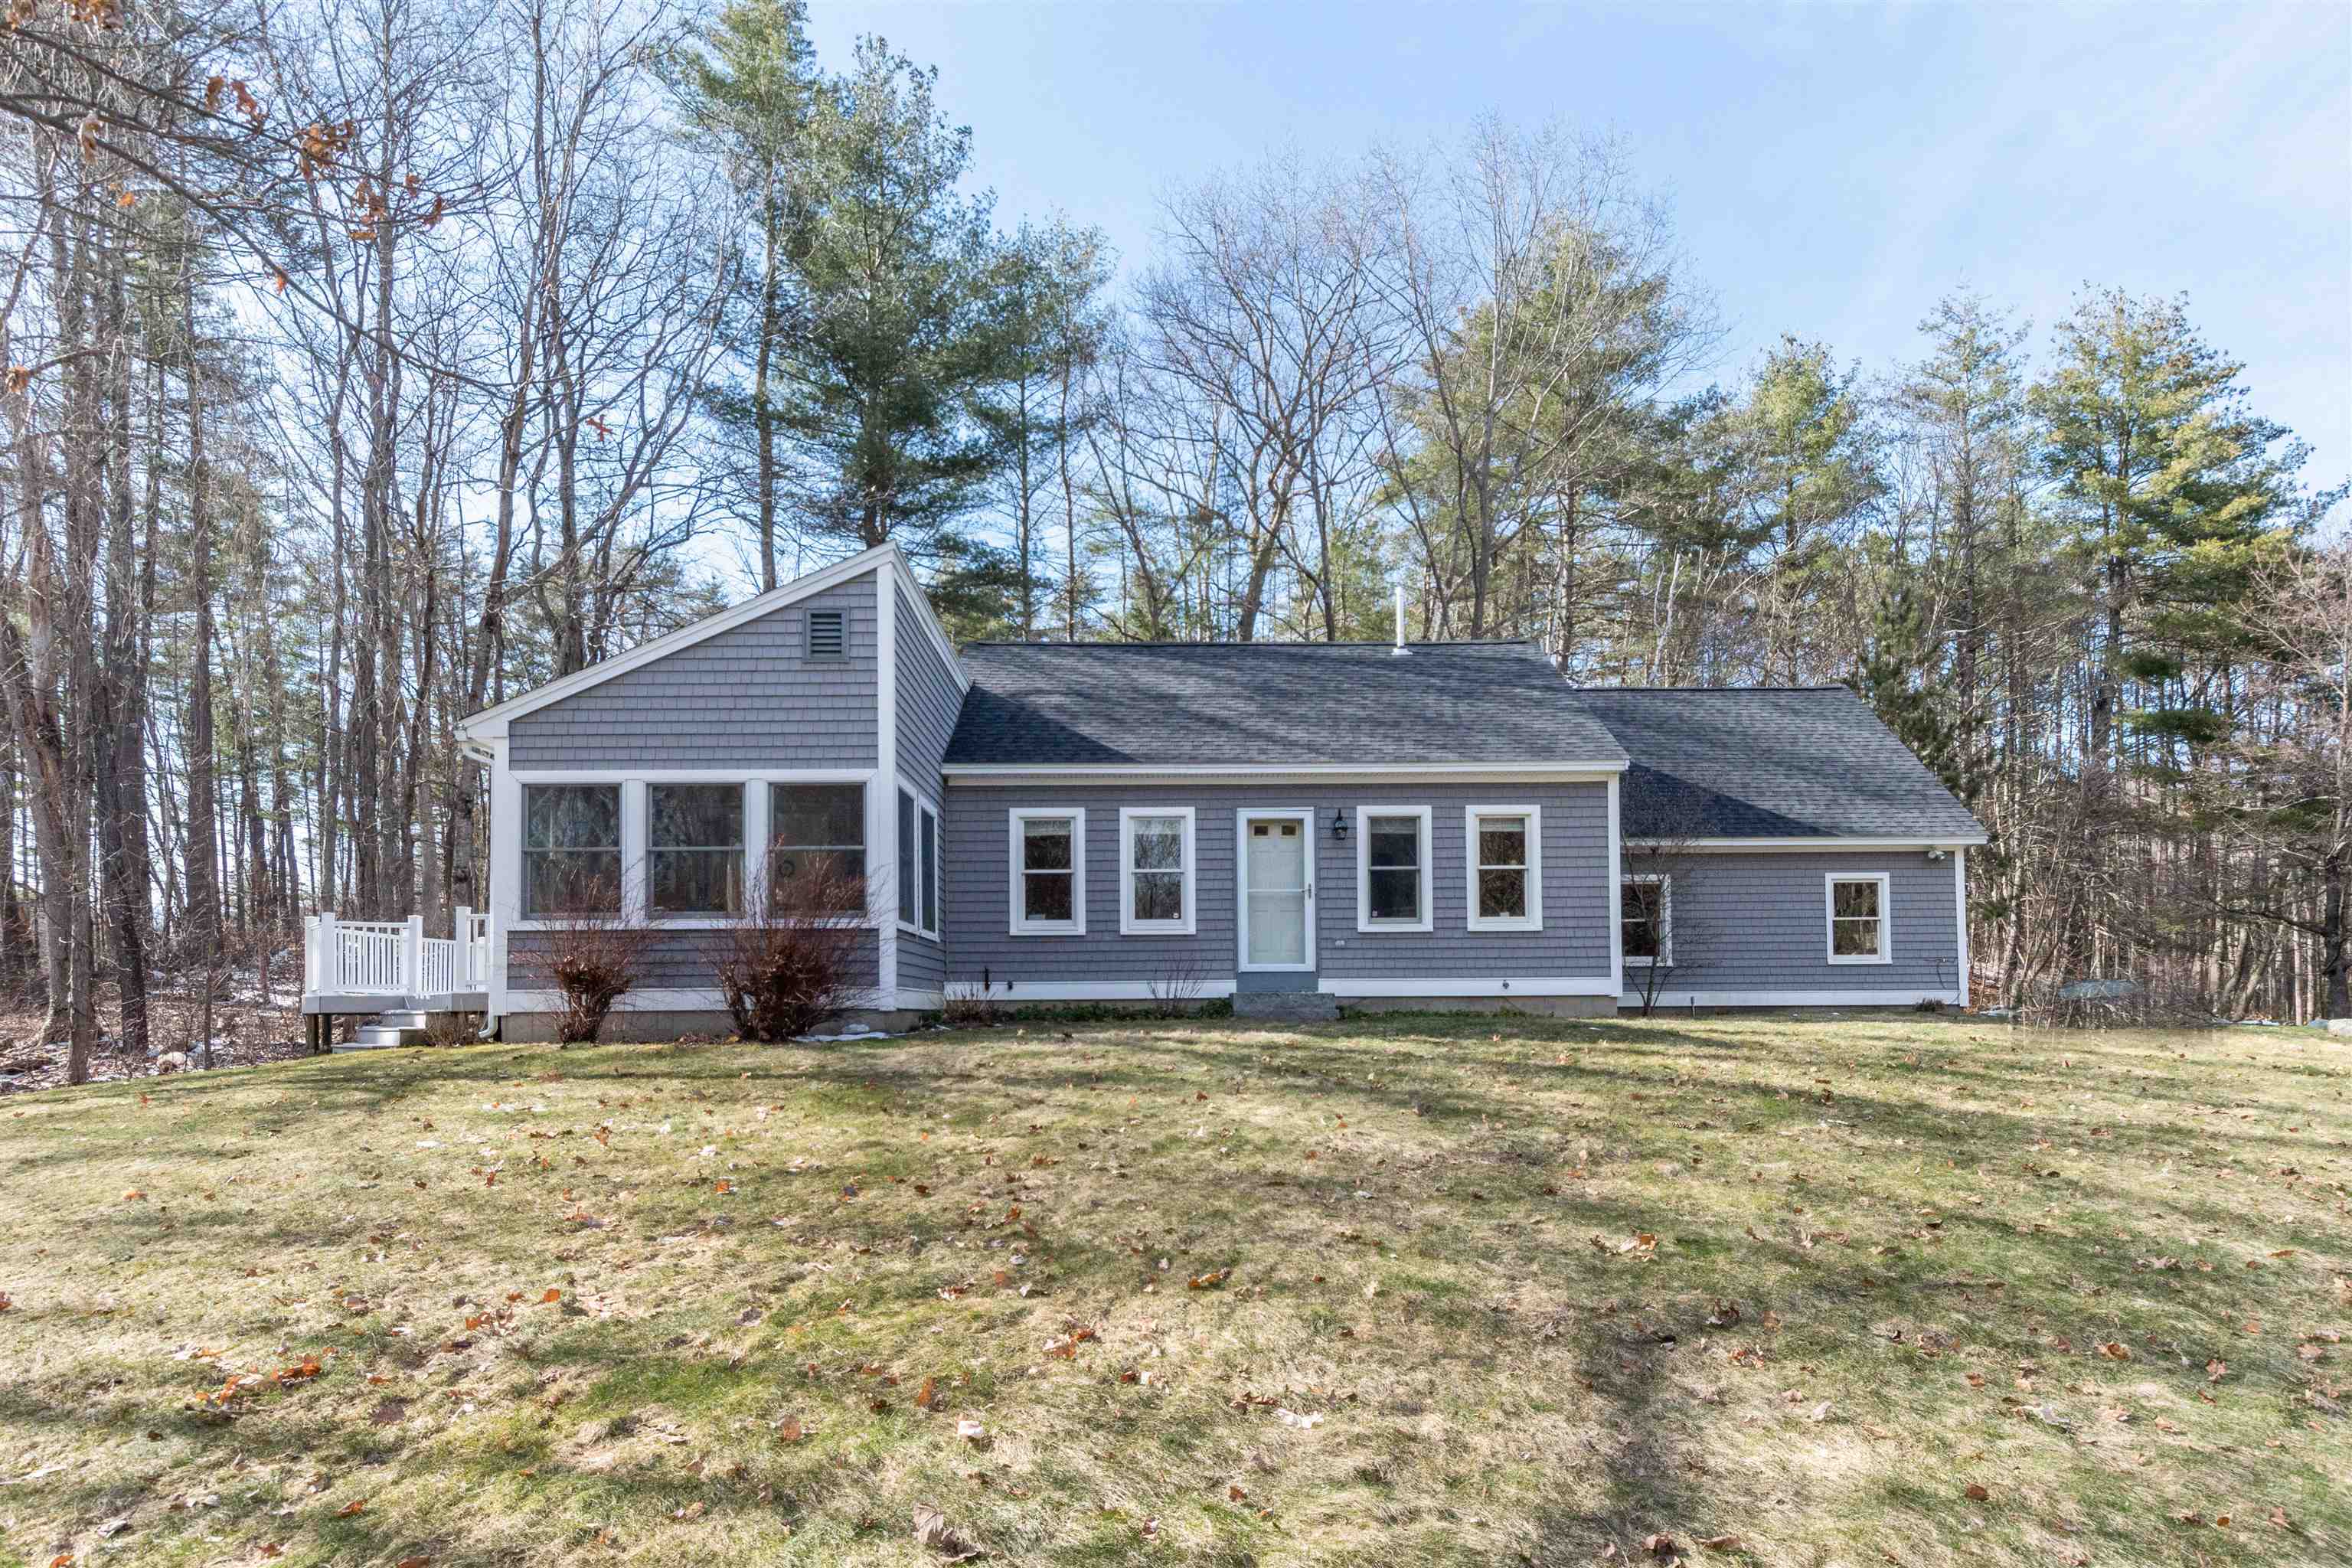 7A Strearns Road, Amherst, NH 03031